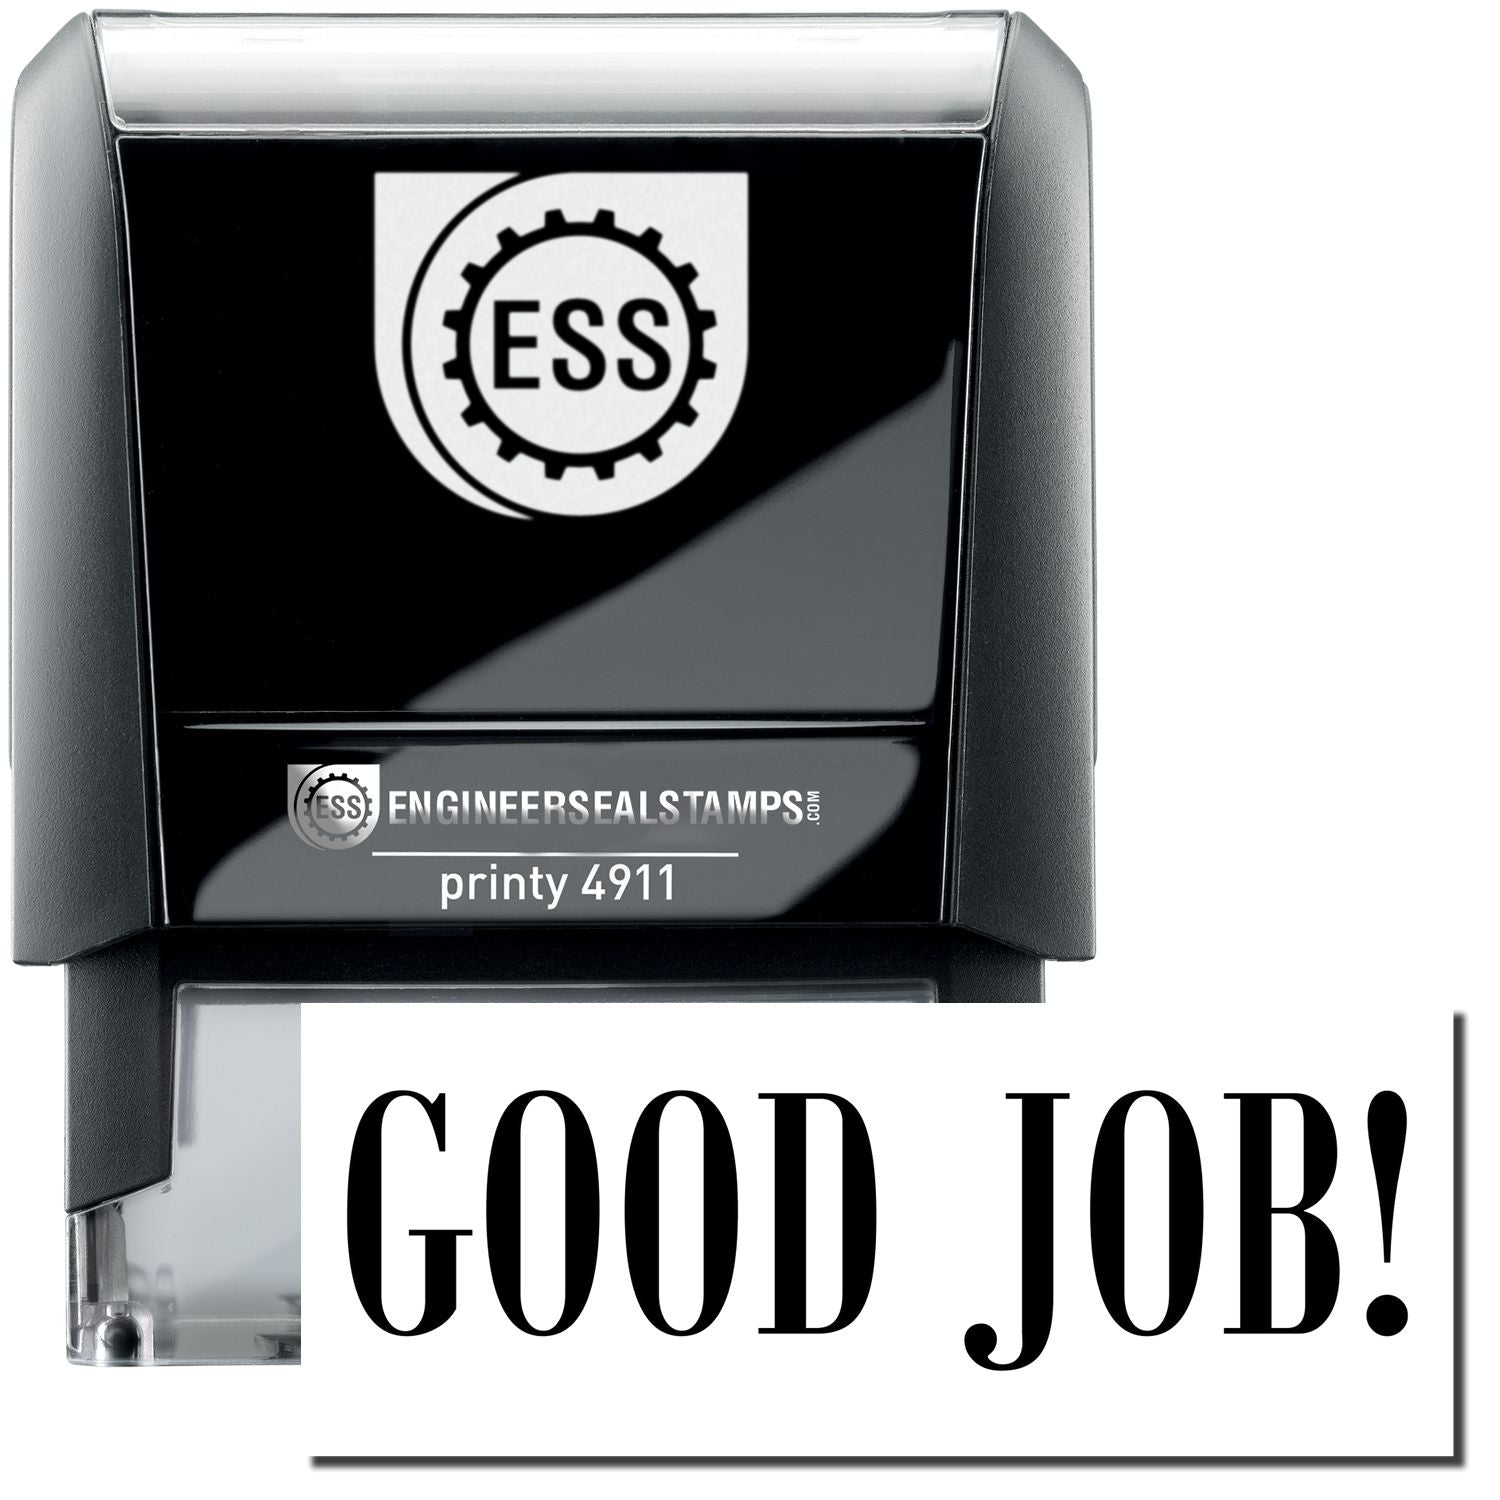 A self-inking stamp with a stamped image showing how the text "GOOD JOB!" is displayed after stamping.